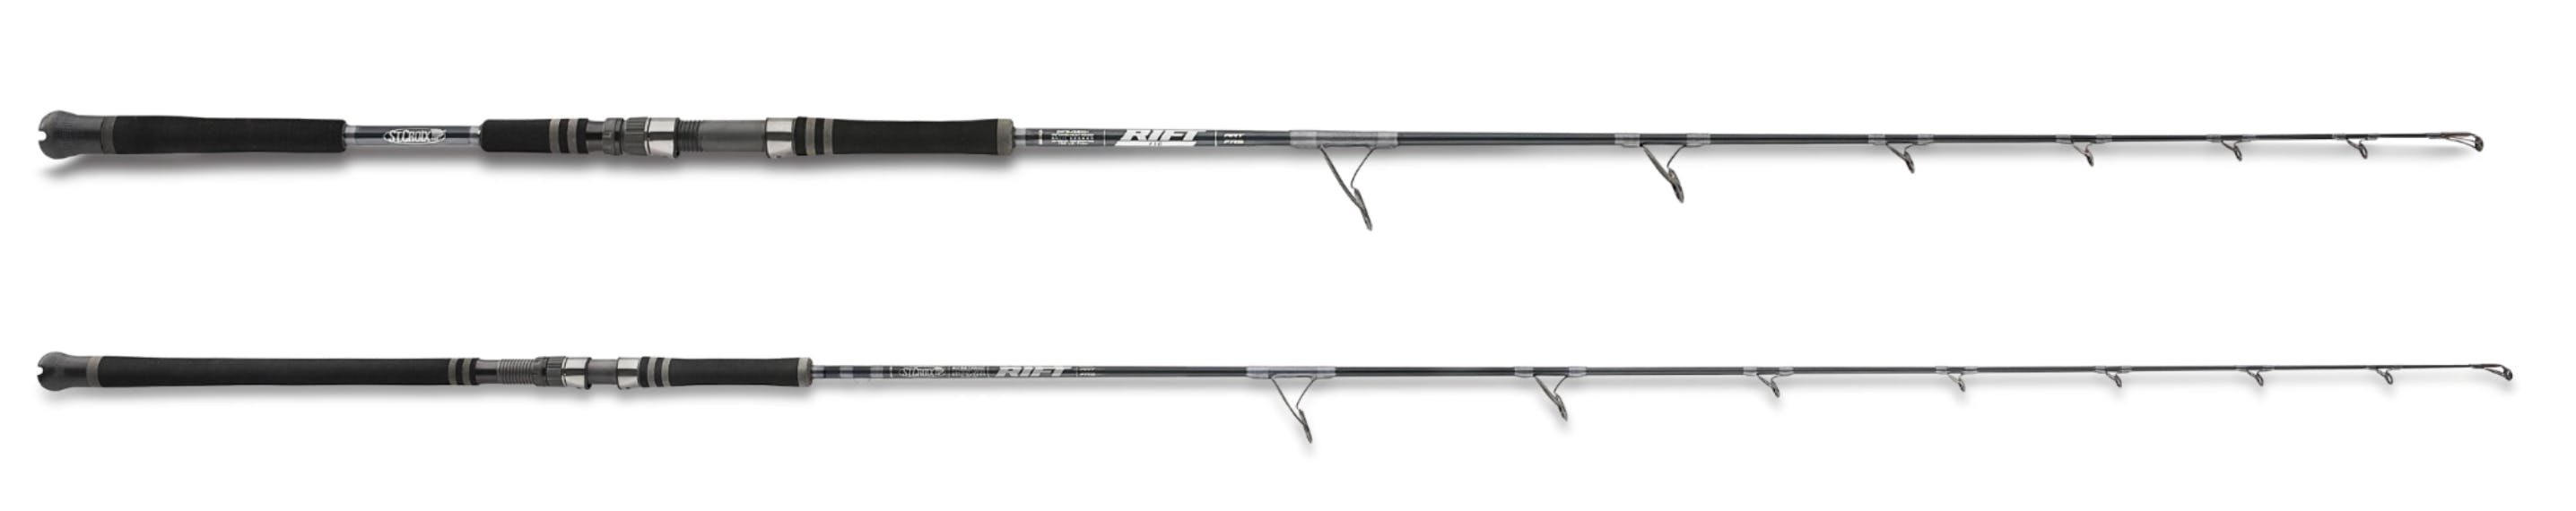 Product image of the St. Croix Rift Jig (top) and the St. Croix Rift Salt (bottom). 